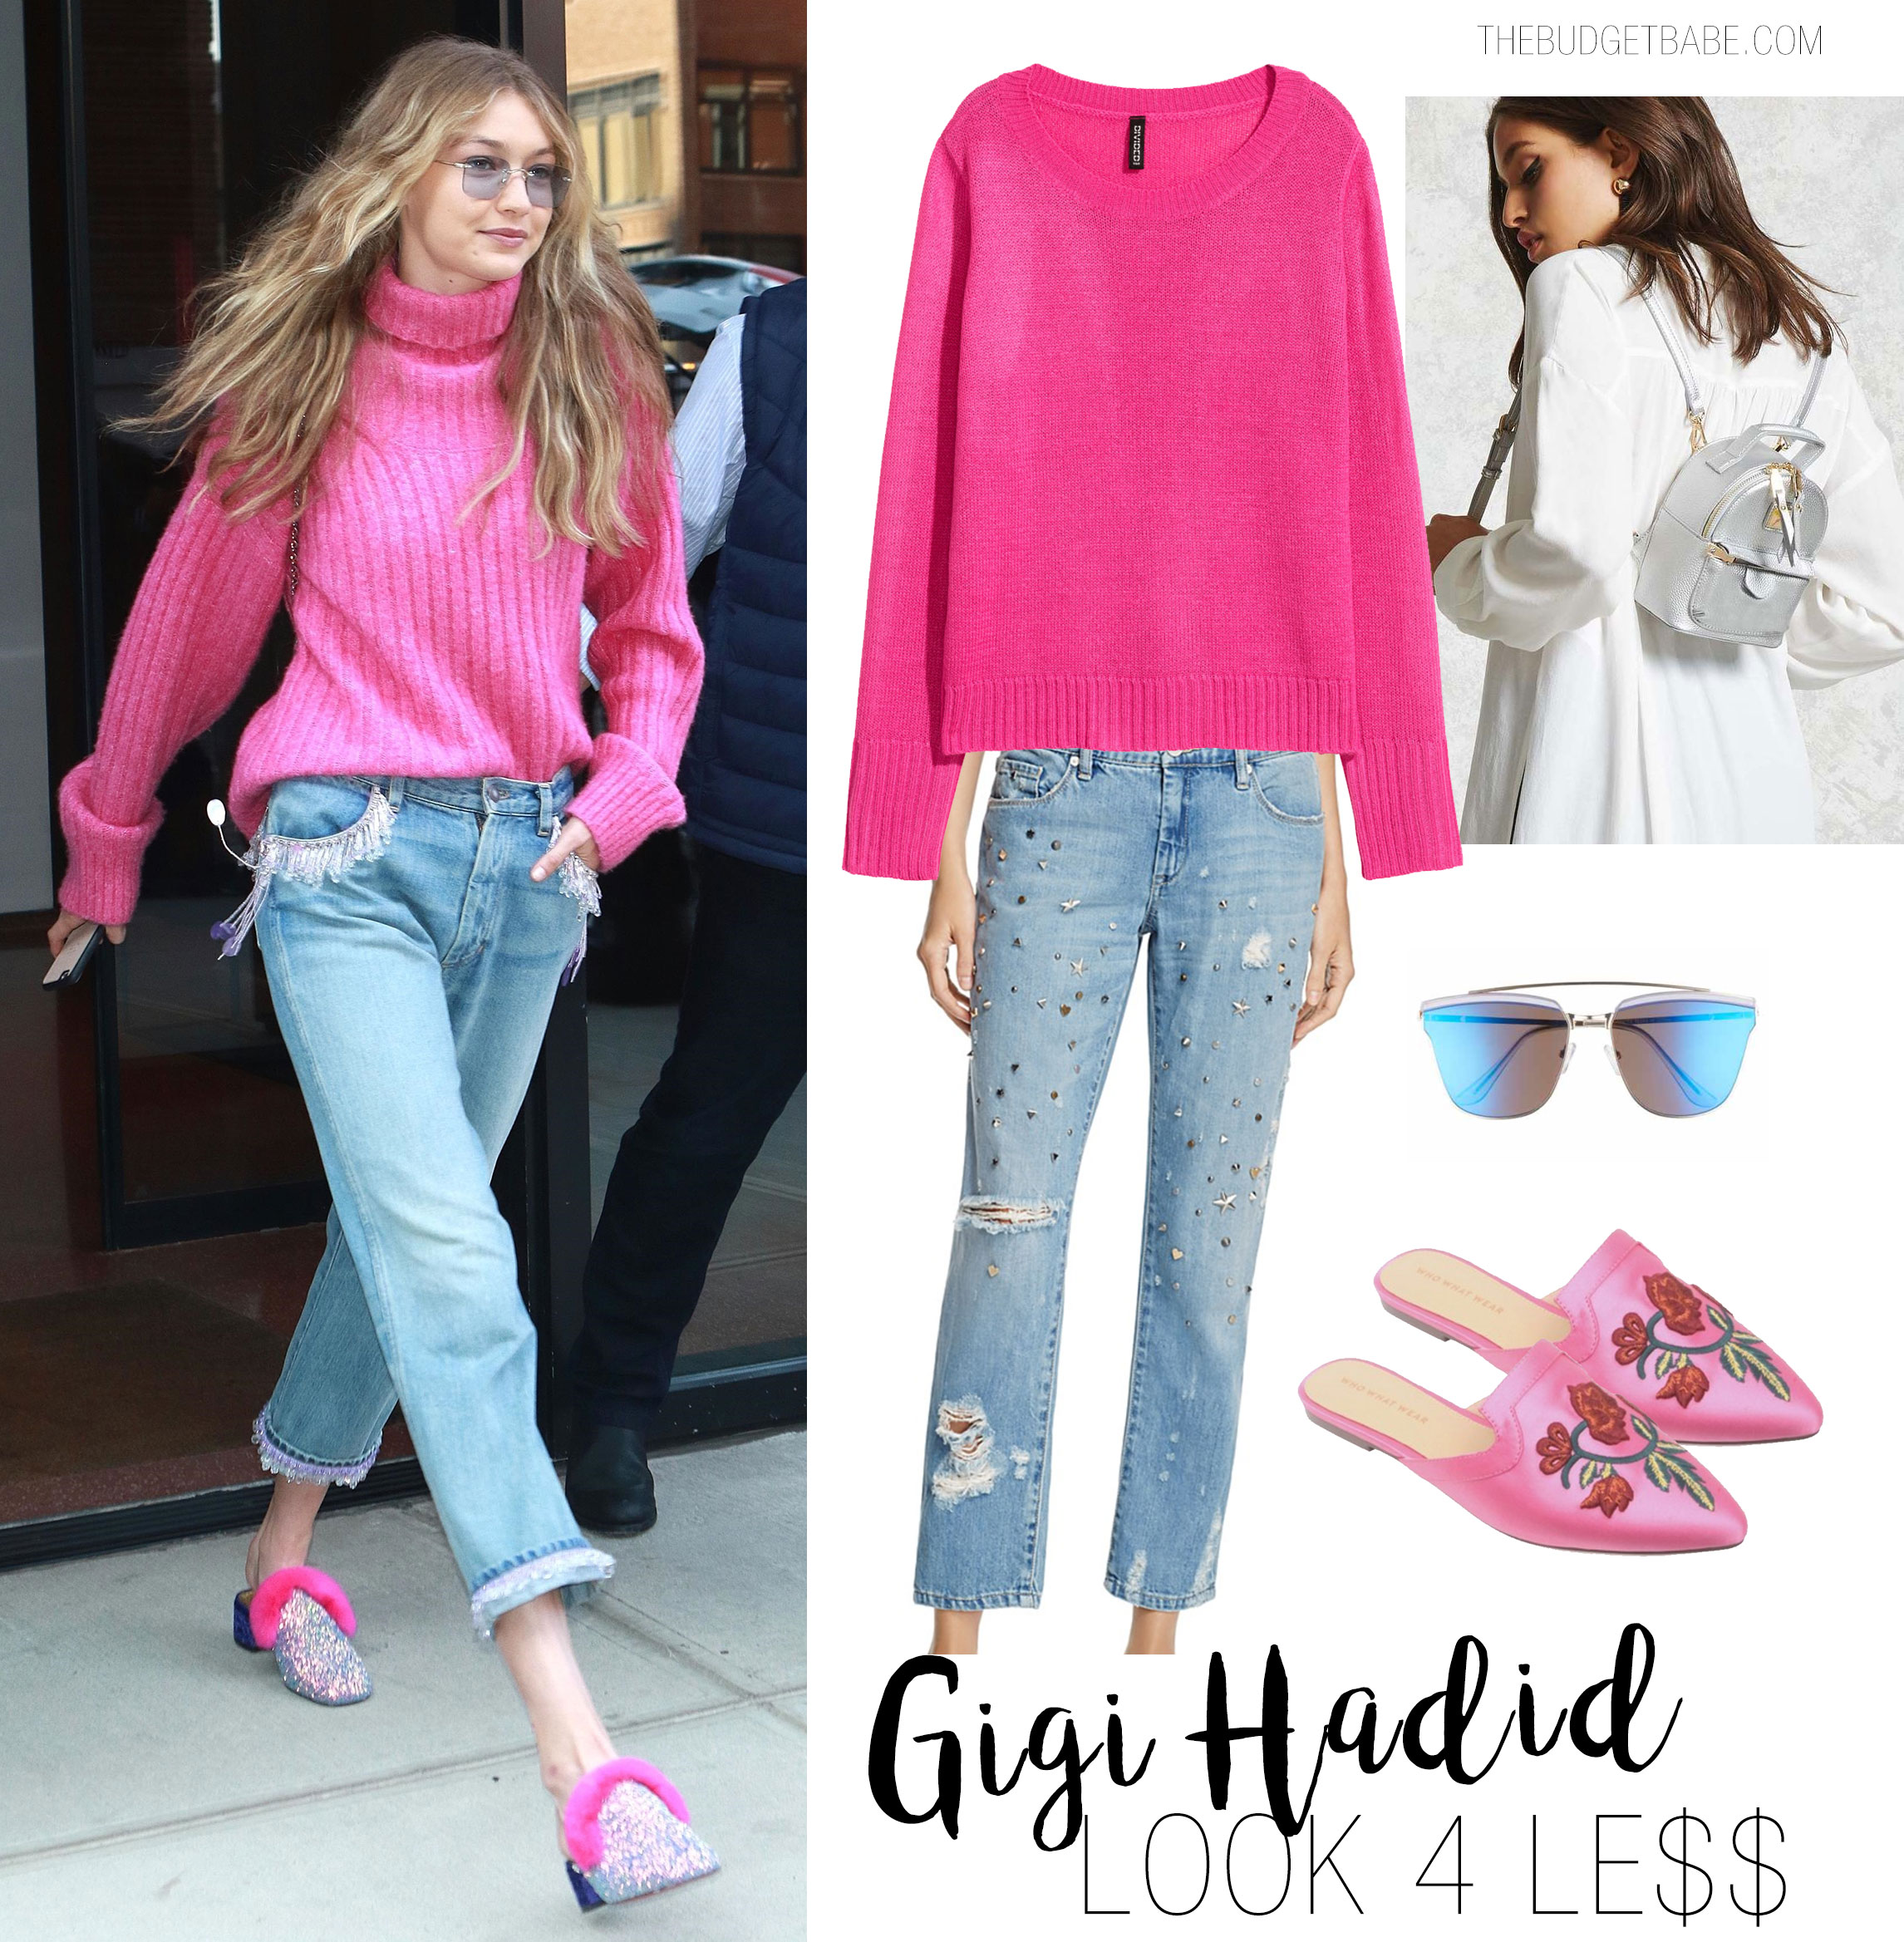 Gigi Hadid wears a hot pink turtleneck sweater with embellished jeans and Christian Louboutin glitter and fur mules.